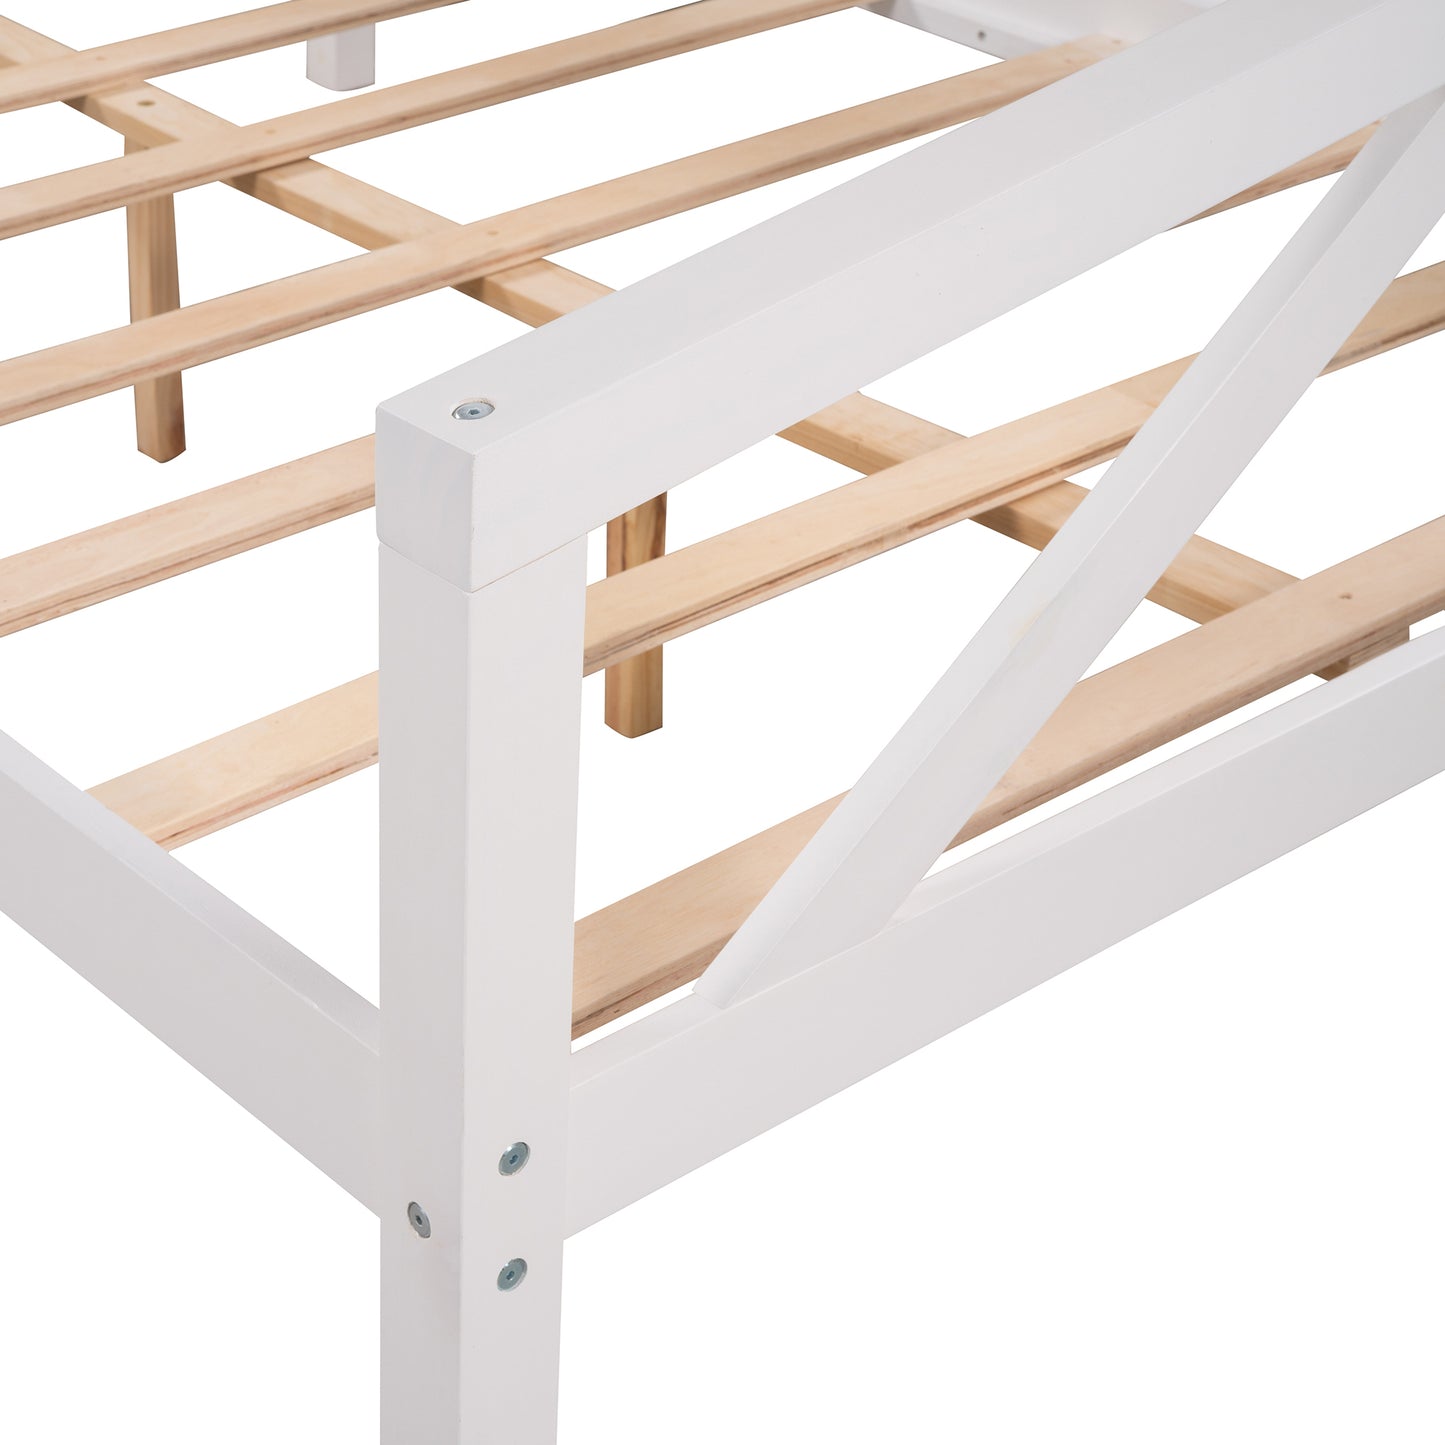 Full size Daybed, Wood Slat Support, White